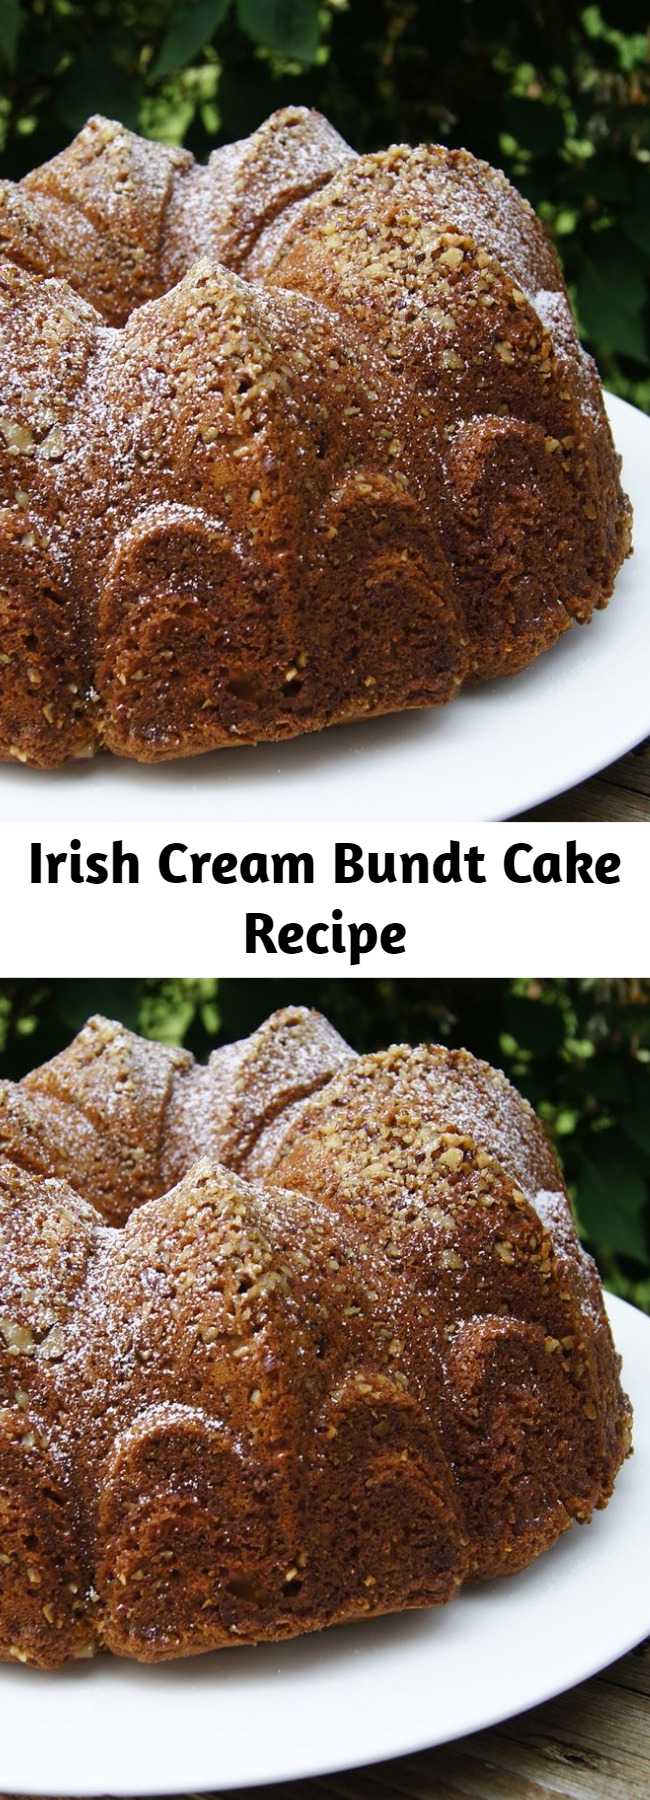 Irish Cream Bundt Cake Recipe - Great tasting glazed Bundt cake with Irish cream baked in. Excellent for any time or any occasion.